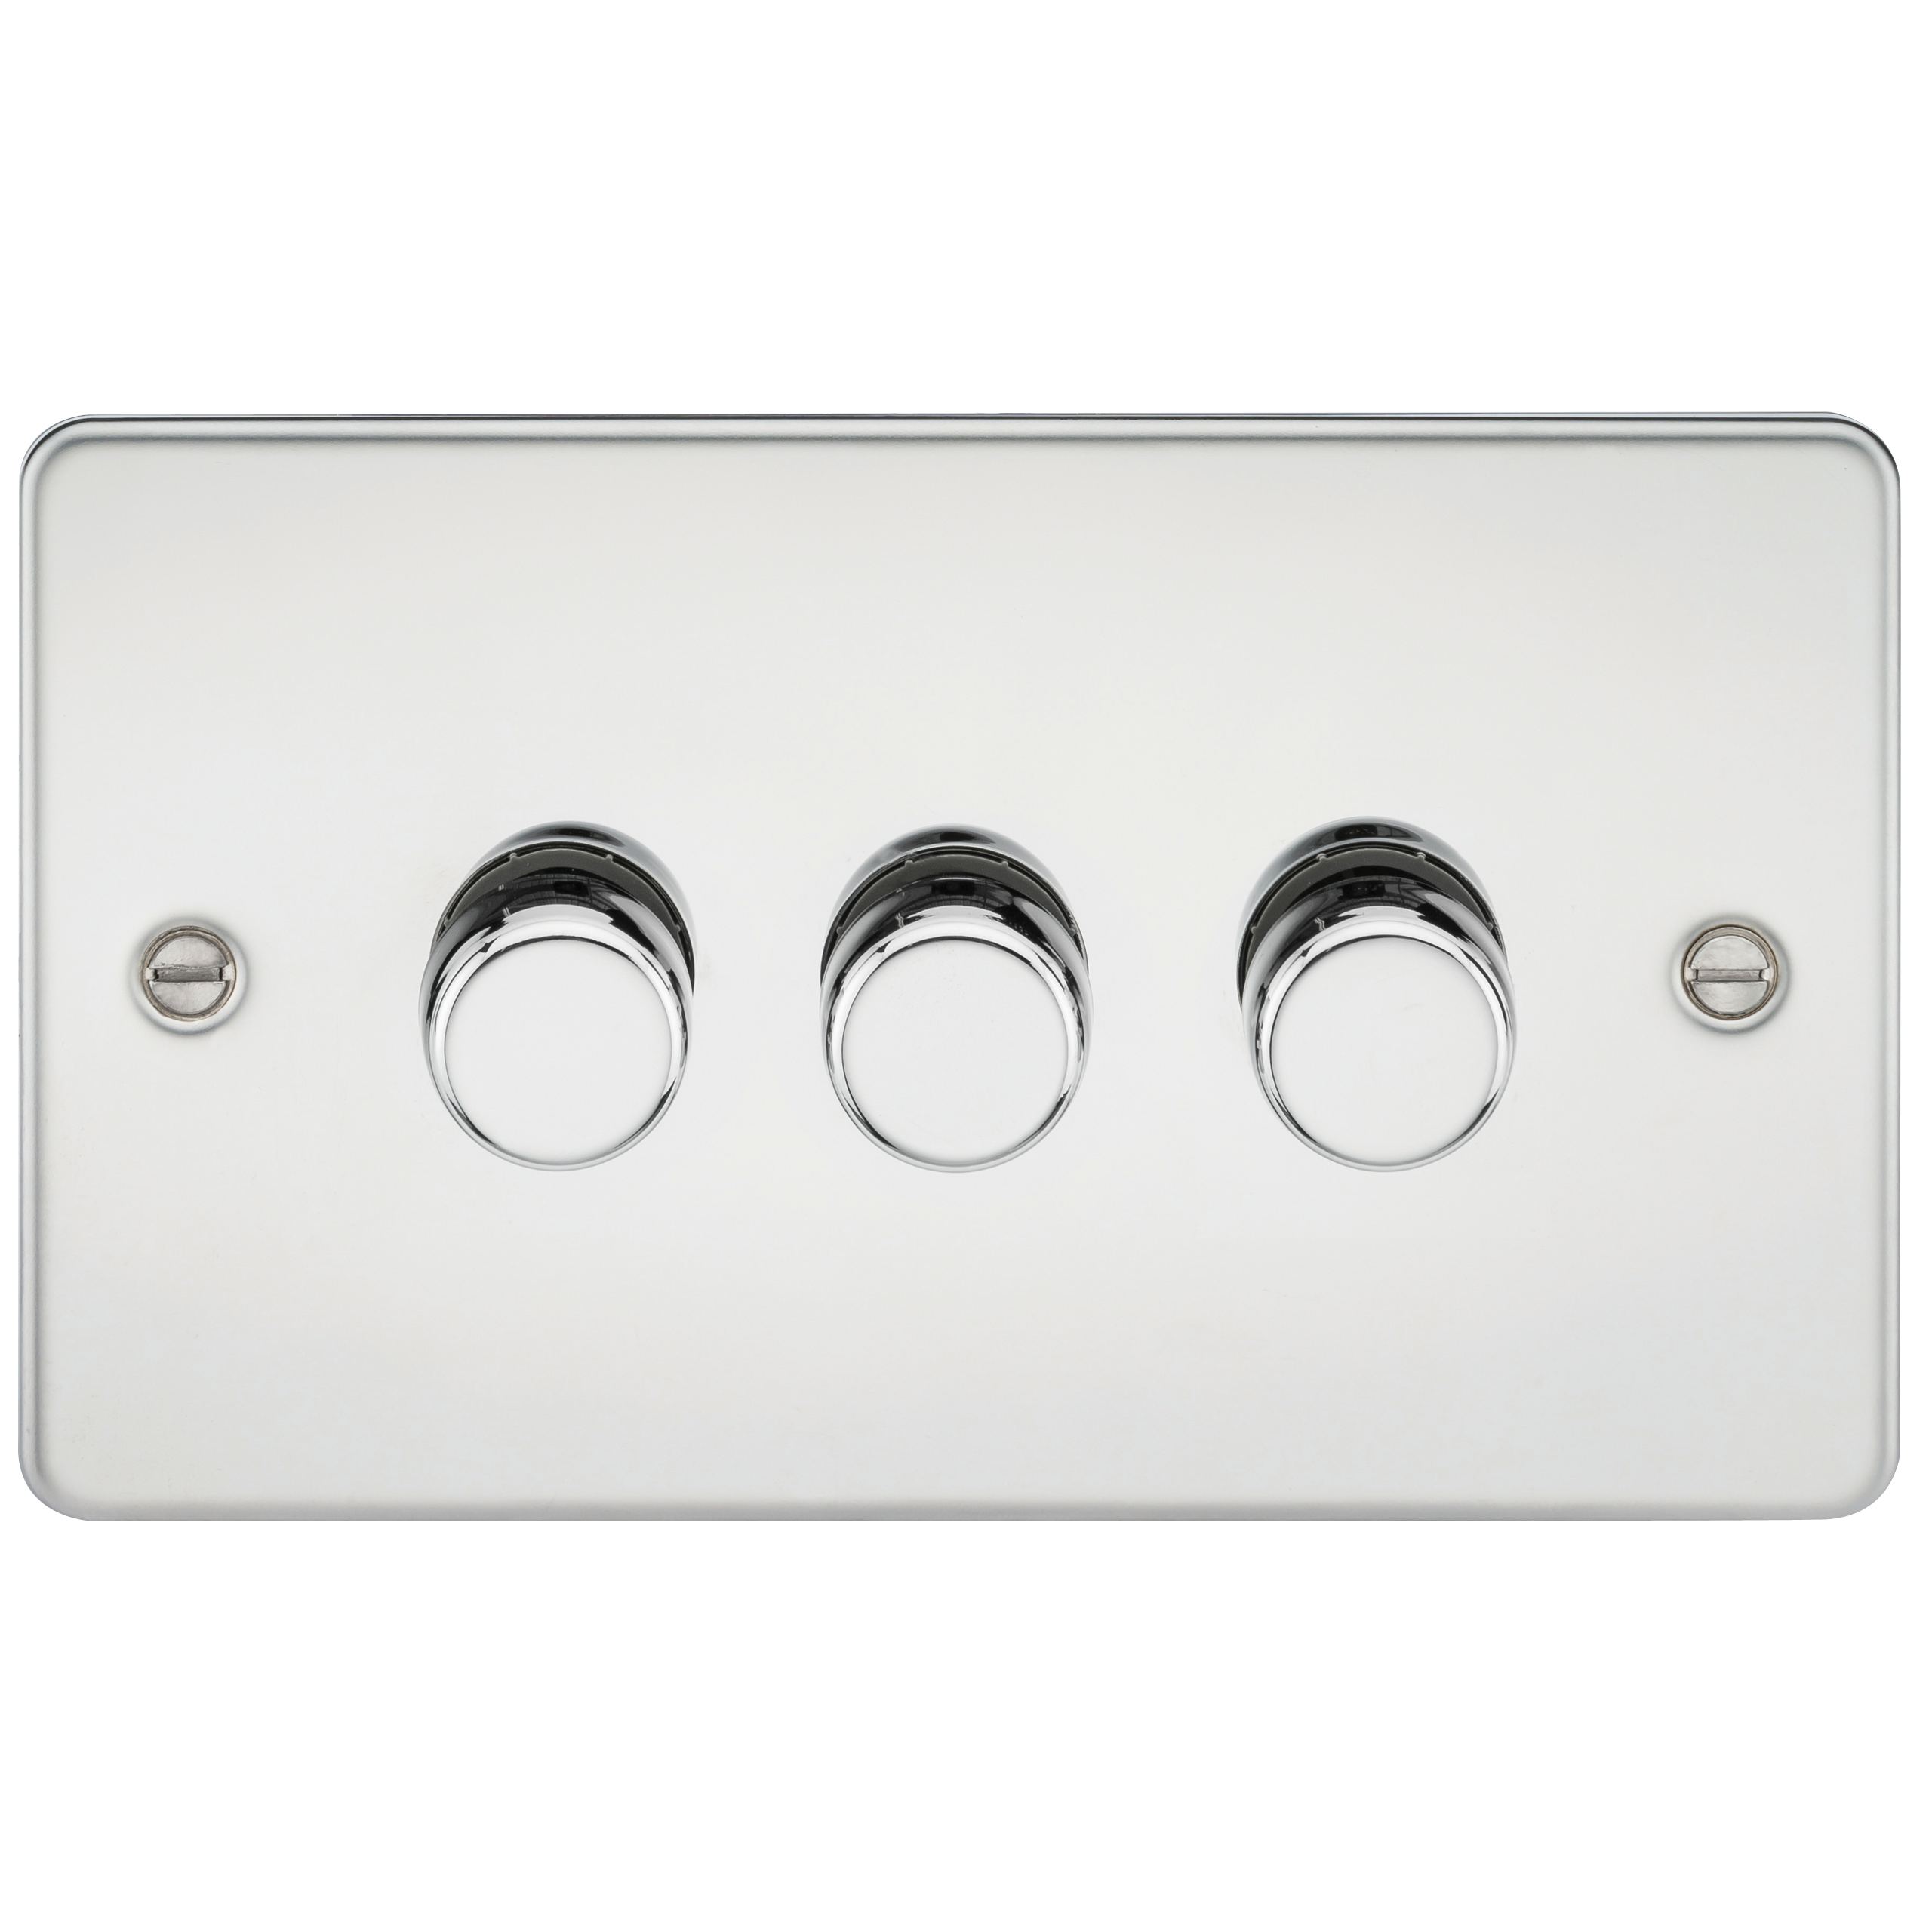 FLAT PLATE 3G 2 WAY 40-400W DIMMER - POLISHED CHROME - FP2173PC 